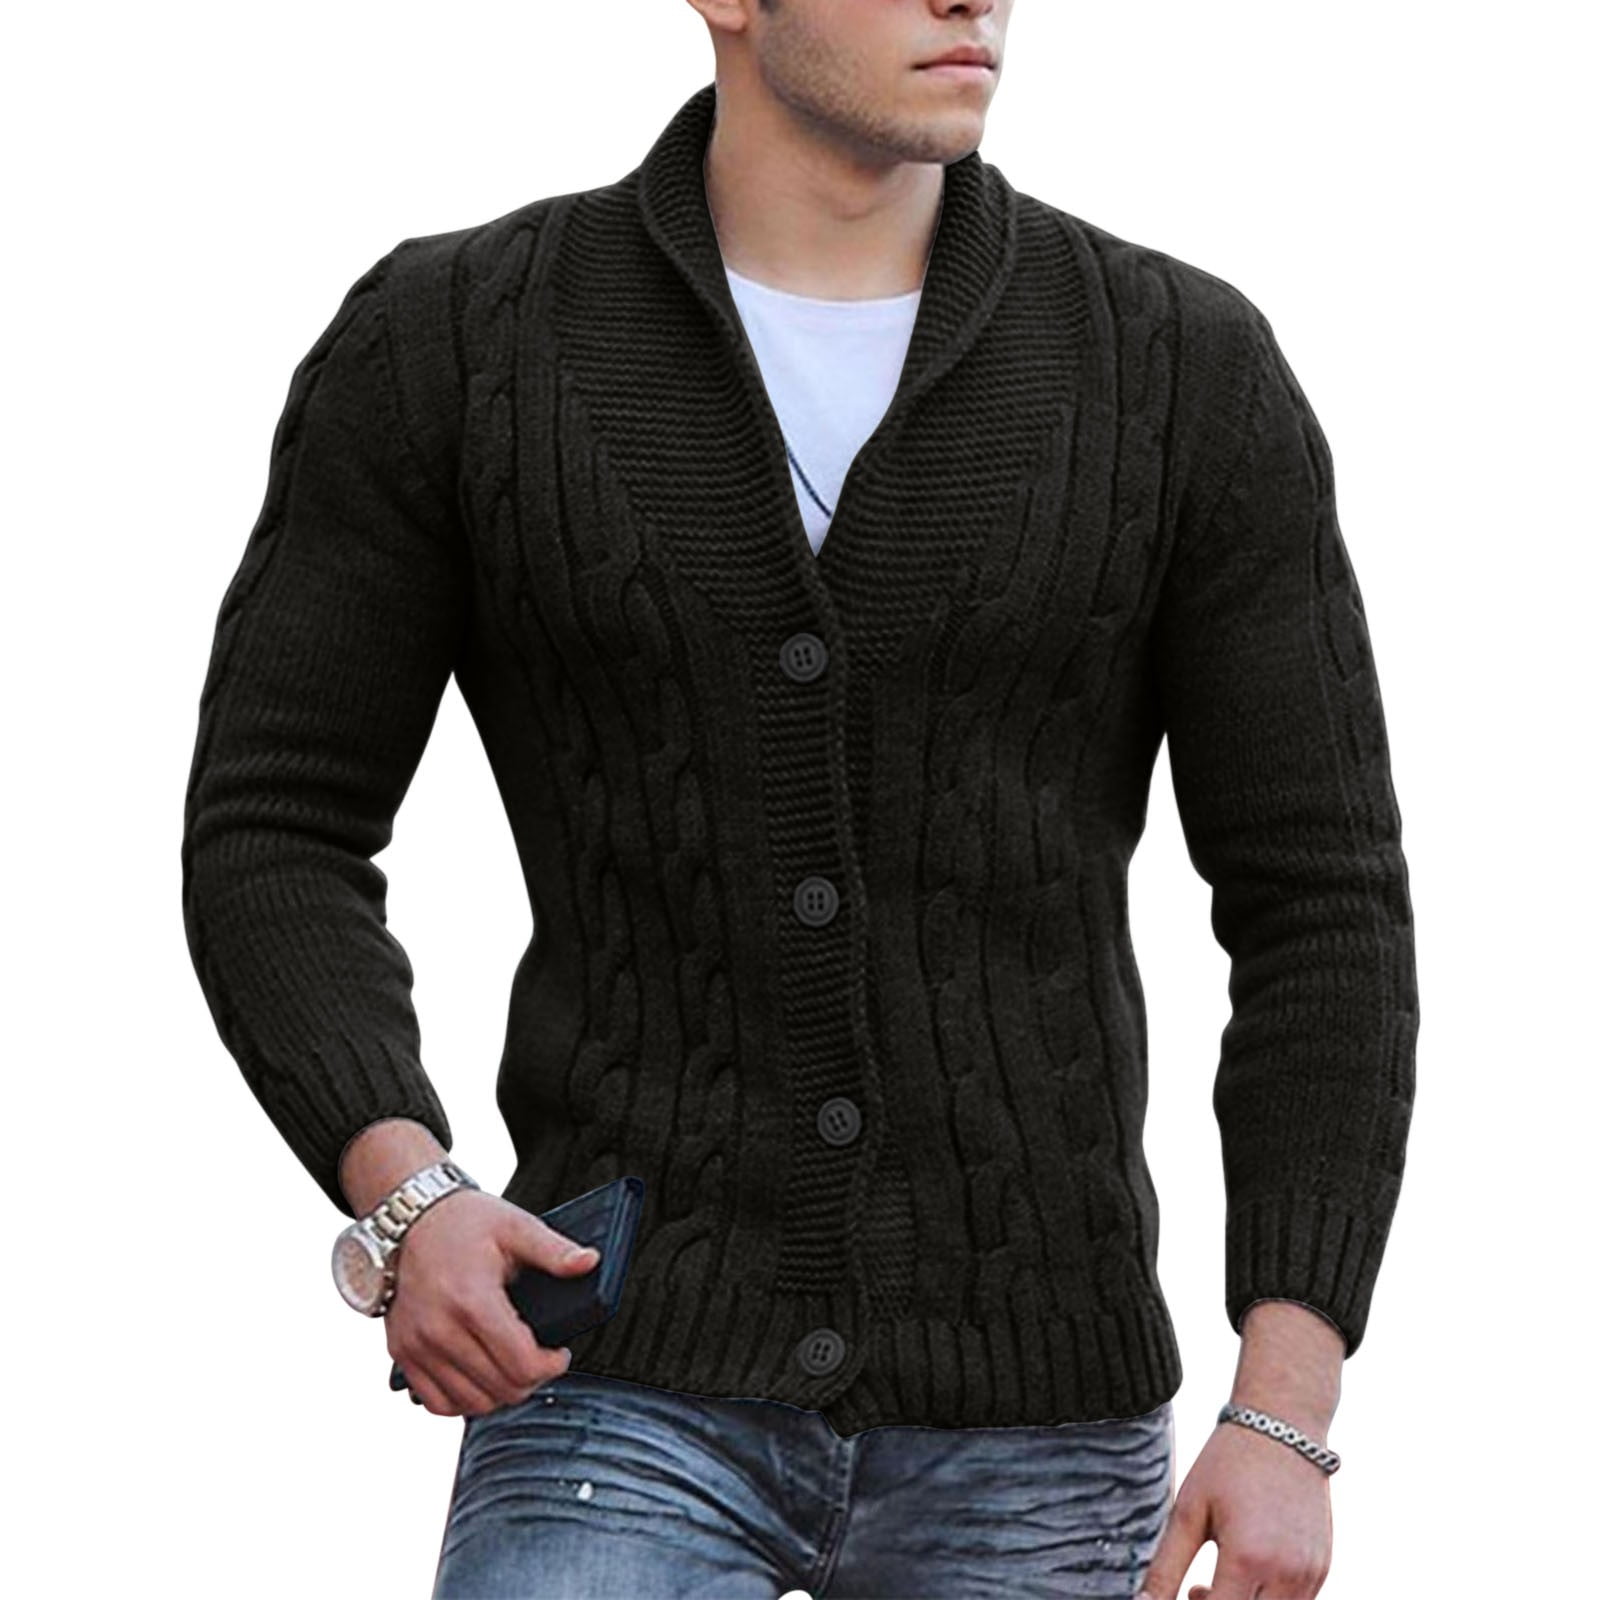 TOWED22 Sweater For Men Trendy,Men’s Cardigan Sweater Cashmere Wool ...